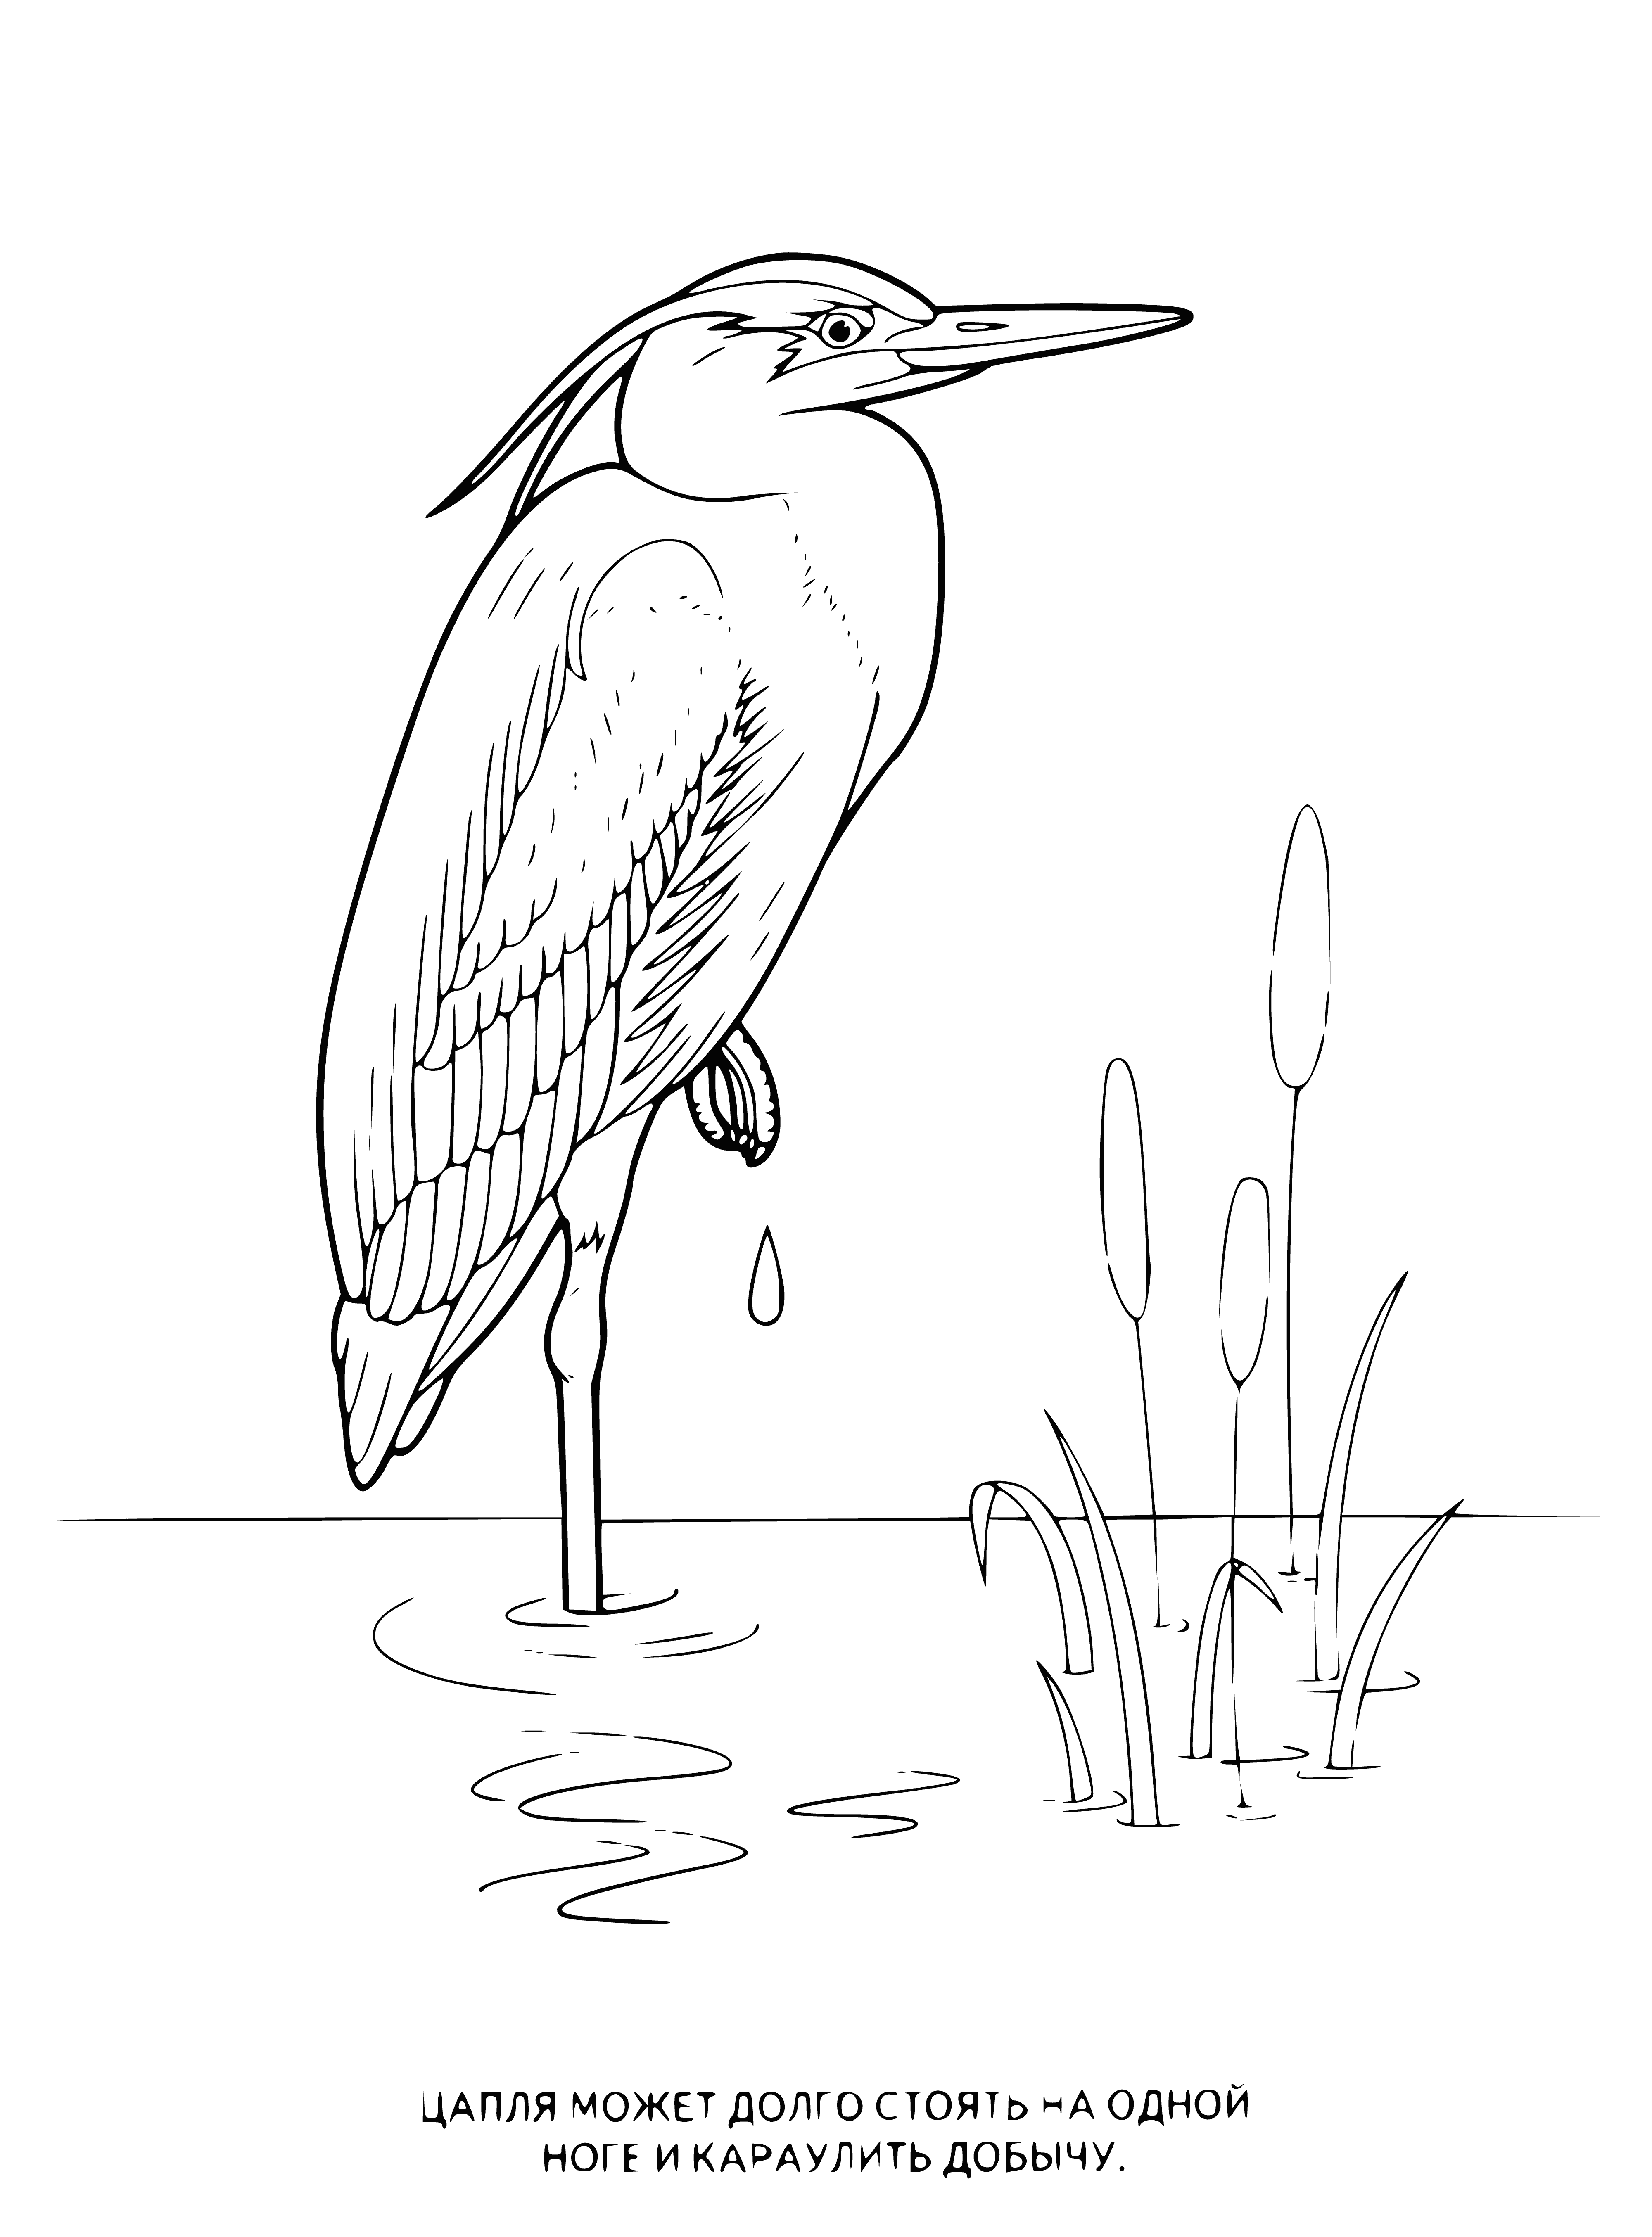 coloring page: The heron is a graceful bird standing on a rock in the water - long legs, neck, beak, gray & white.